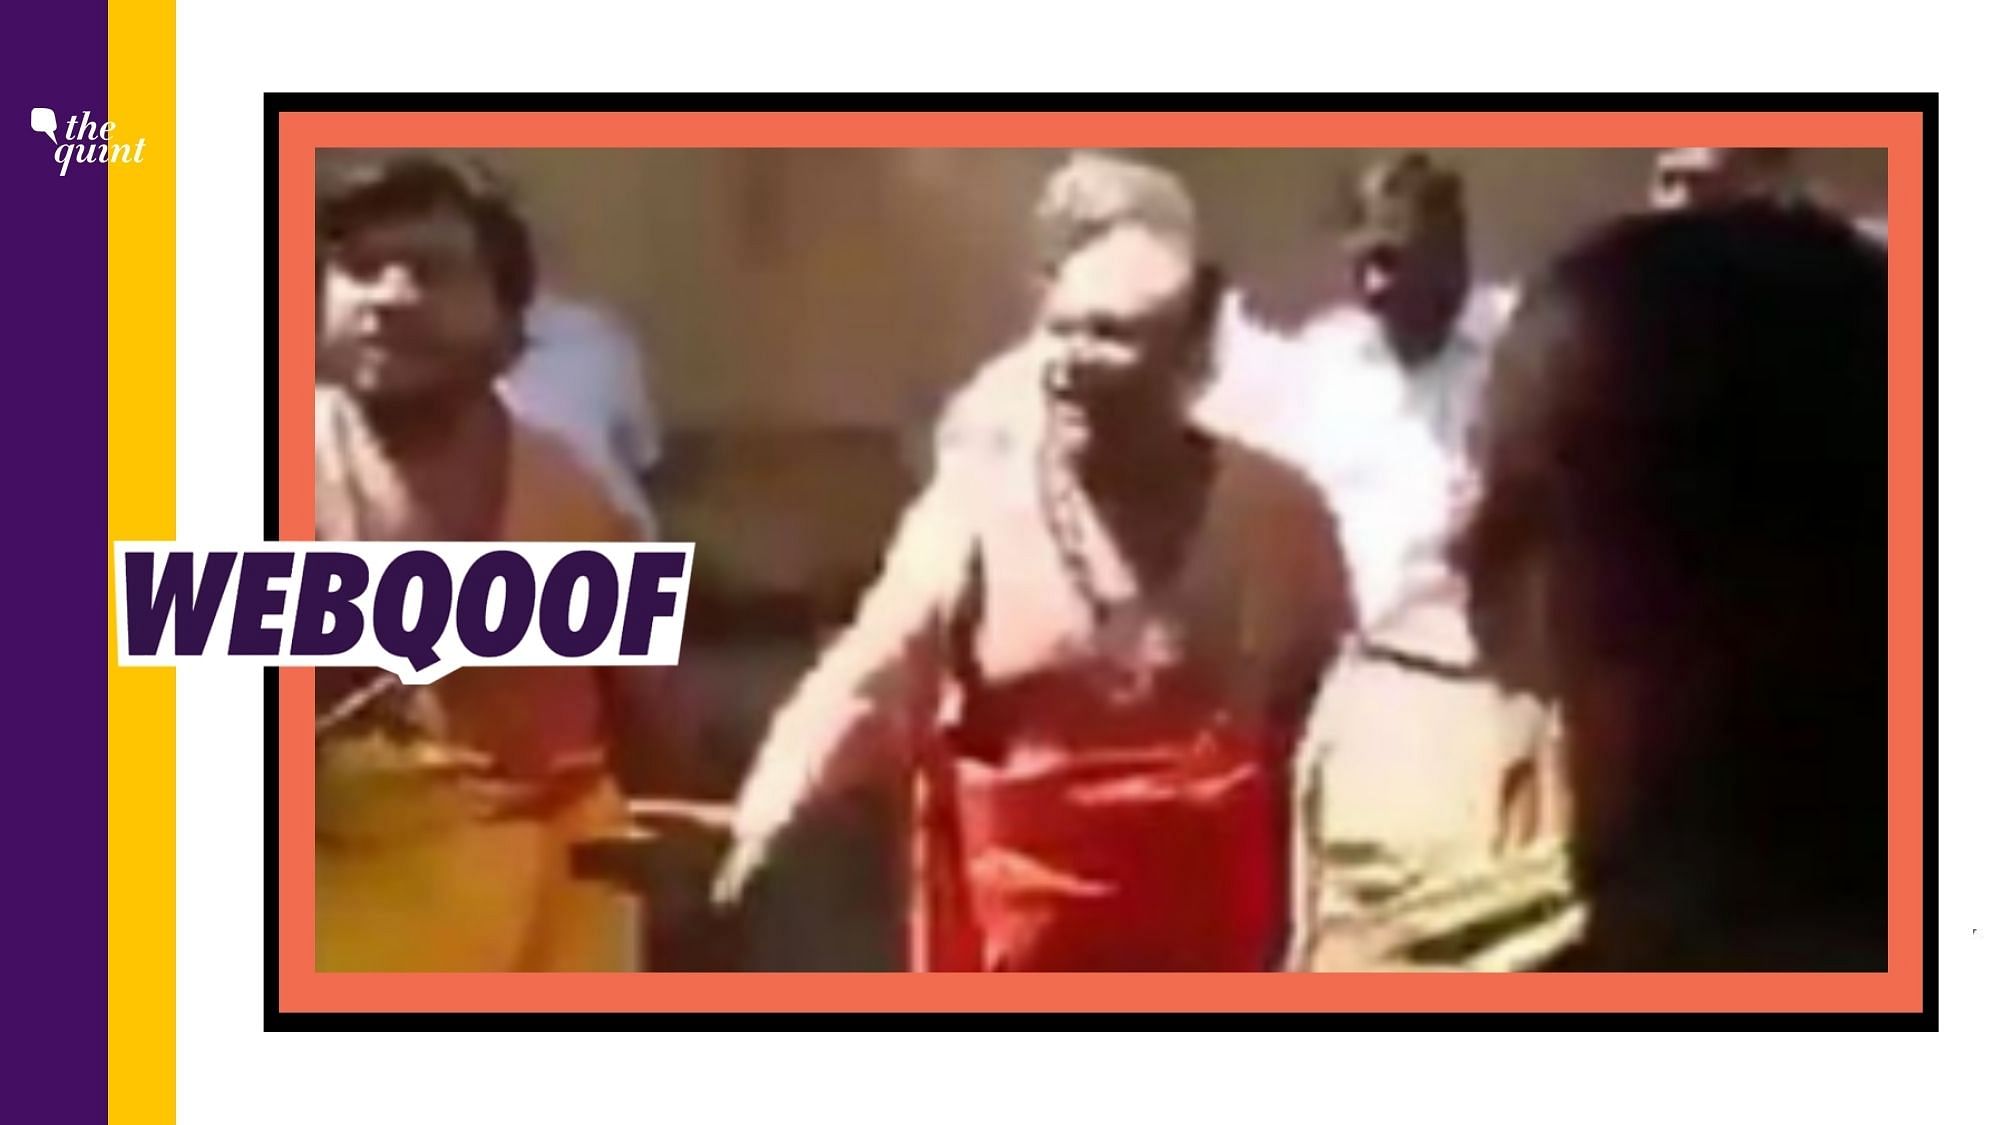 An old video wherein an argument happened between the priests of Kolaramma temple and government officers over the installation of hundi has resurfaced with misleading claims.